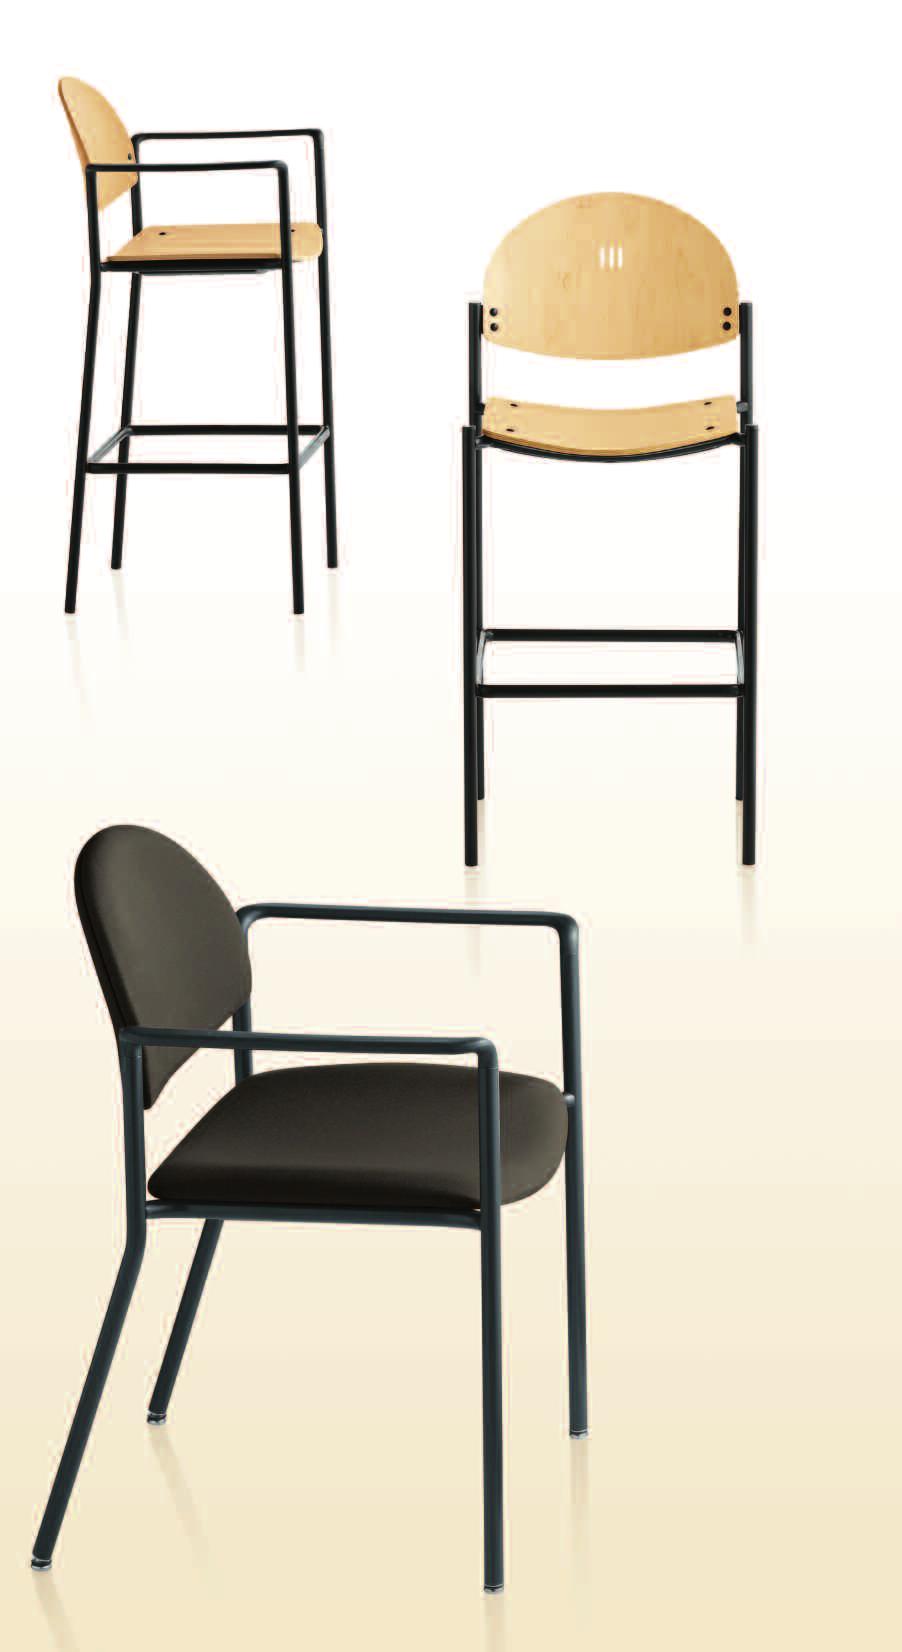 Versa Café Stools The Versa Café Stool combines the clean design and durability of the Versa chair with the height of a stool. The Versa Café Stool is available in polypropylene, fabric and wood.